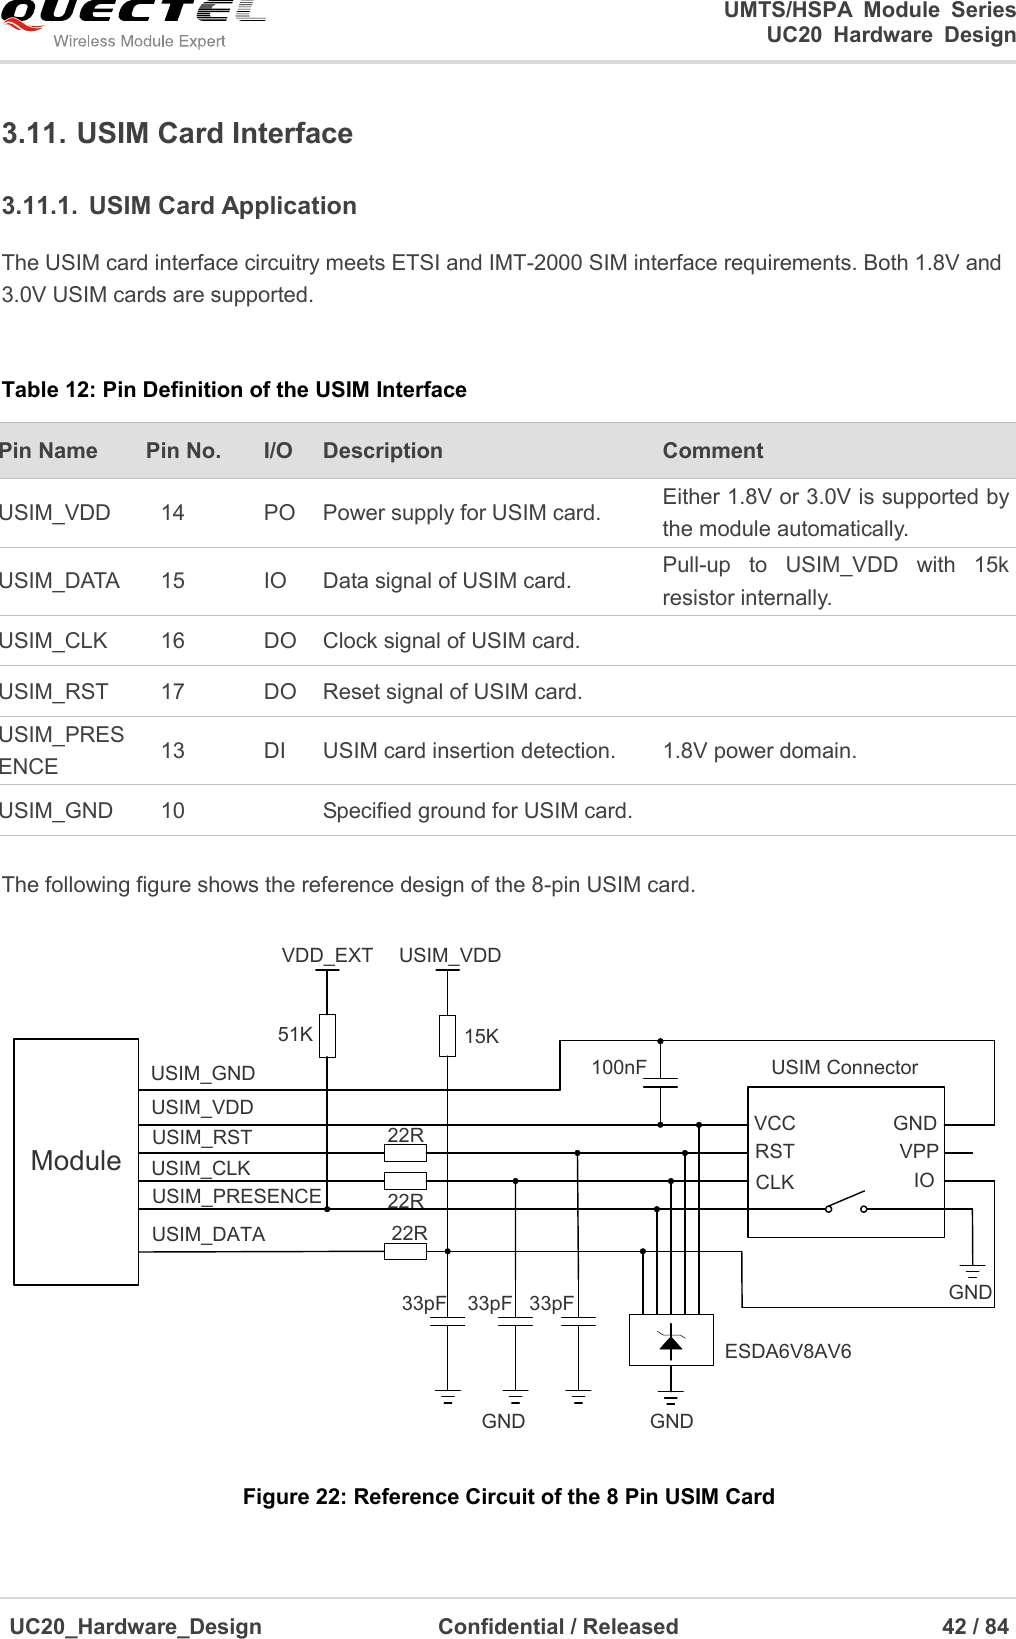                                                                                                                                               UMTS/HSPA  Module  Series                                                                 UC20  Hardware  Design  UC20_Hardware_Design                  Confidential / Released                            42 / 84     3.11. USIM Card Interface 3.11.1.  USIM Card Application The USIM card interface circuitry meets ETSI and IMT-2000 SIM interface requirements. Both 1.8V and 3.0V USIM cards are supported.  Table 12: Pin Definition of the USIM Interface Pin Name   Pin No. I/O Description Comment USIM_VDD 14 PO Power supply for USIM card. Either 1.8V or 3.0V is supported by the module automatically. USIM_DATA 15 IO Data signal of USIM card. Pull-up  to  USIM_VDD  with  15k resistor internally. USIM_CLK 16 DO Clock signal of USIM card.  USIM_RST 17 DO Reset signal of USIM card.  USIM_PRESENCE 13 DI USIM card insertion detection. 1.8V power domain. USIM_GND 10  Specified ground for USIM card.   The following figure shows the reference design of the 8-pin USIM card. ModuleUSIM_VDDUSIM_GNDUSIM_RSTUSIM_CLKUSIM_DATAUSIM_PRESENCE22R22R22RVDD_EXT51K100nF USIM ConnectorGNDGNDESDA6V8AV633pF 33pF 33pFVCCRSTCLK IOVPPGNDGNDUSIM_VDD15K Figure 22: Reference Circuit of the 8 Pin USIM Card 